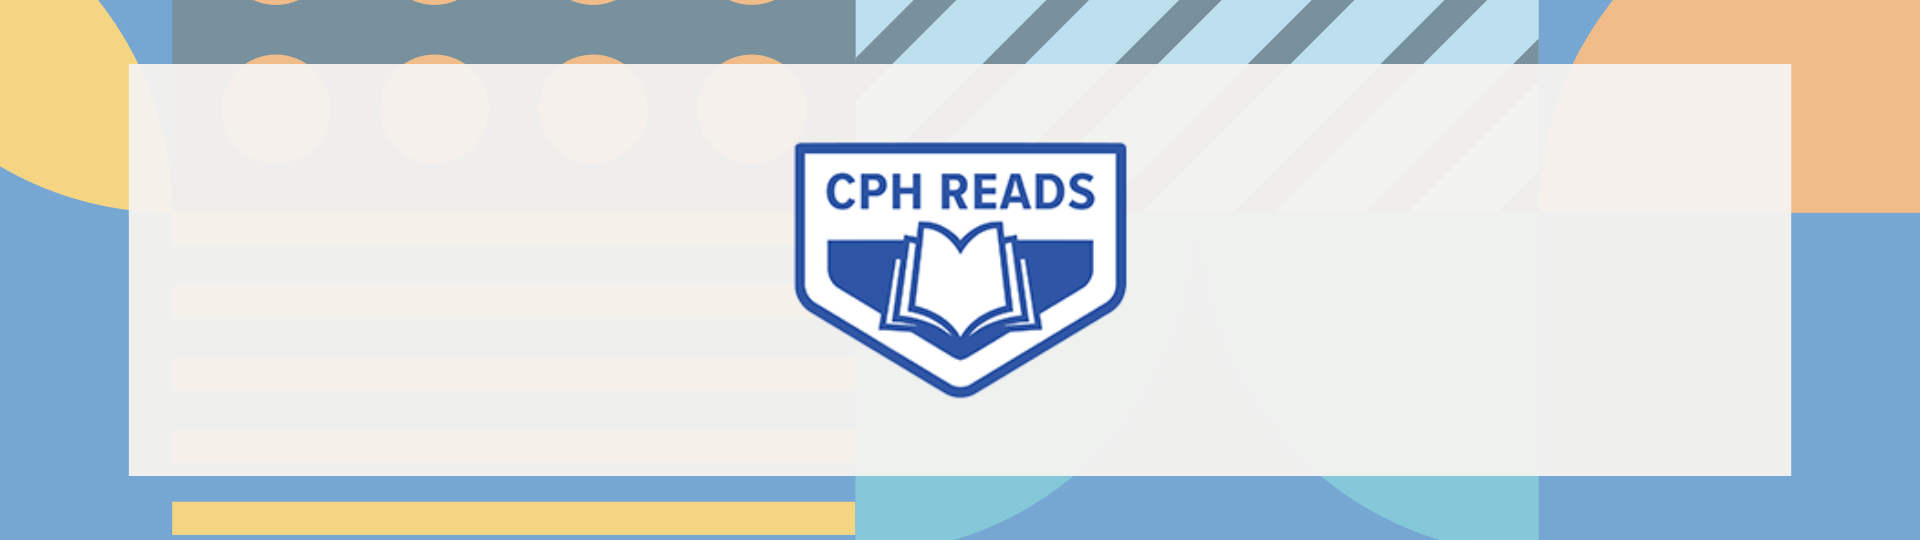 Press Release: Concordia Publishing House Launches Summer Reading Program